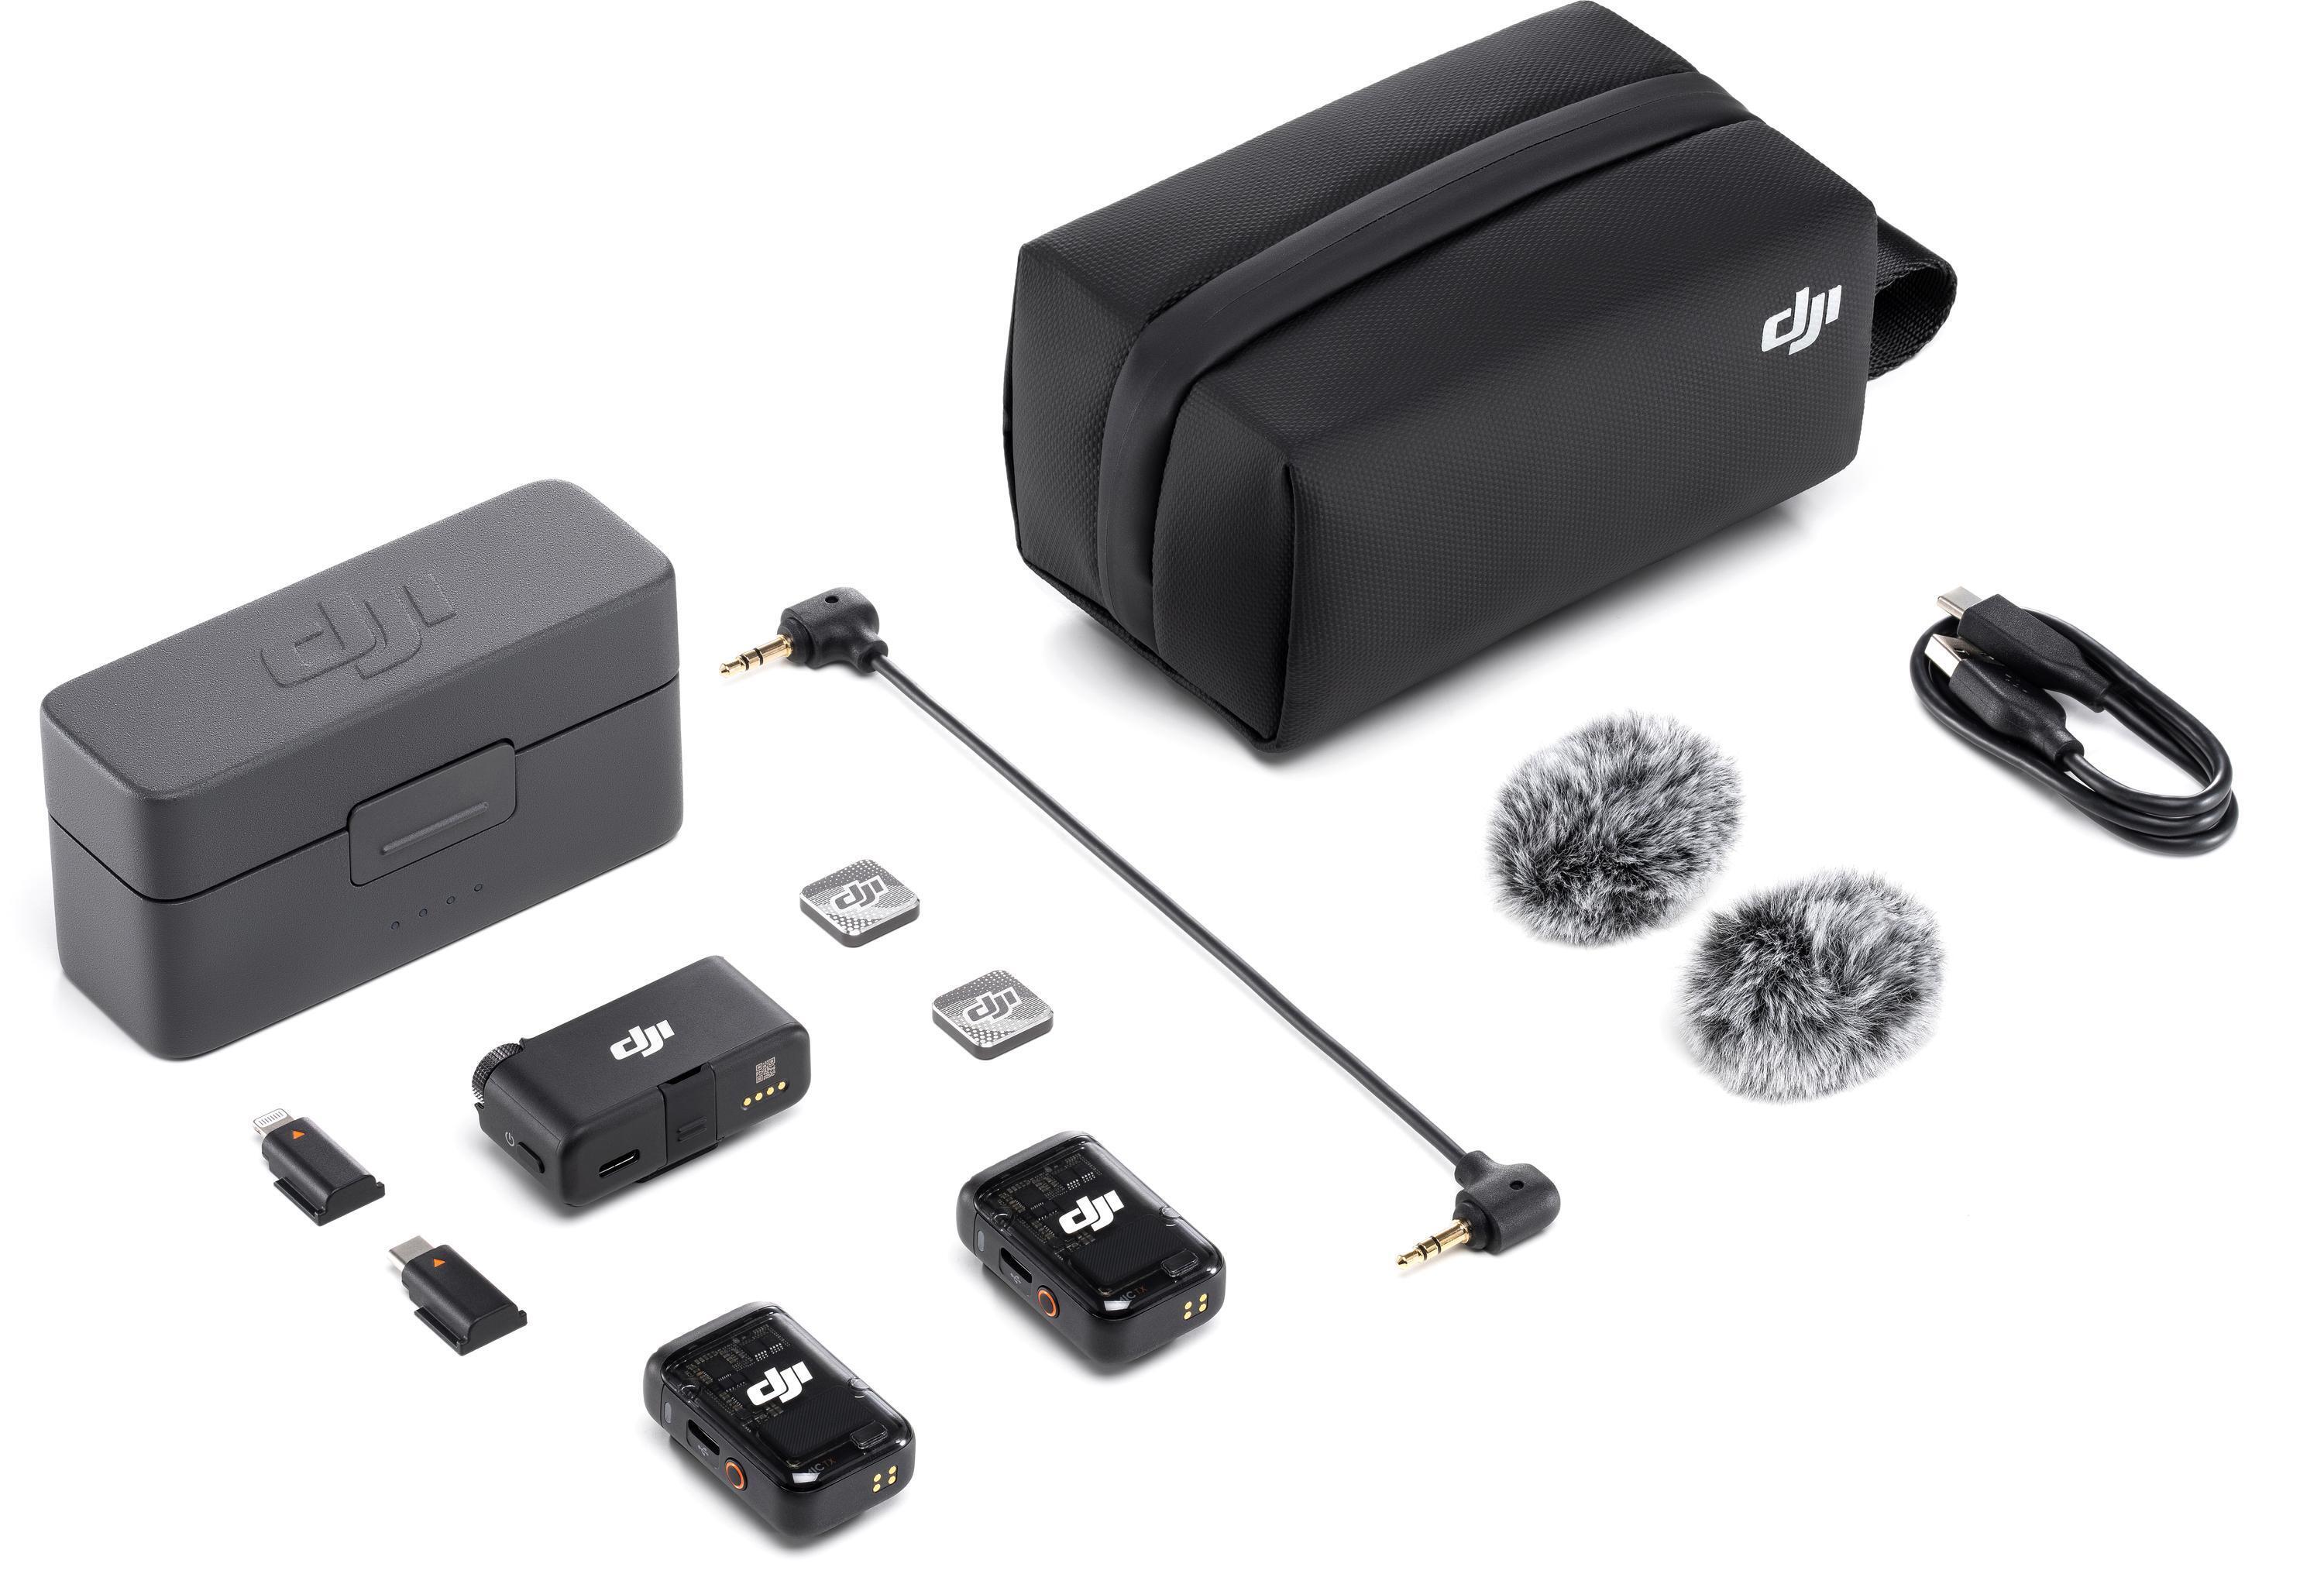 DJI Mic 2 transmitter at the FCC with design, battery update